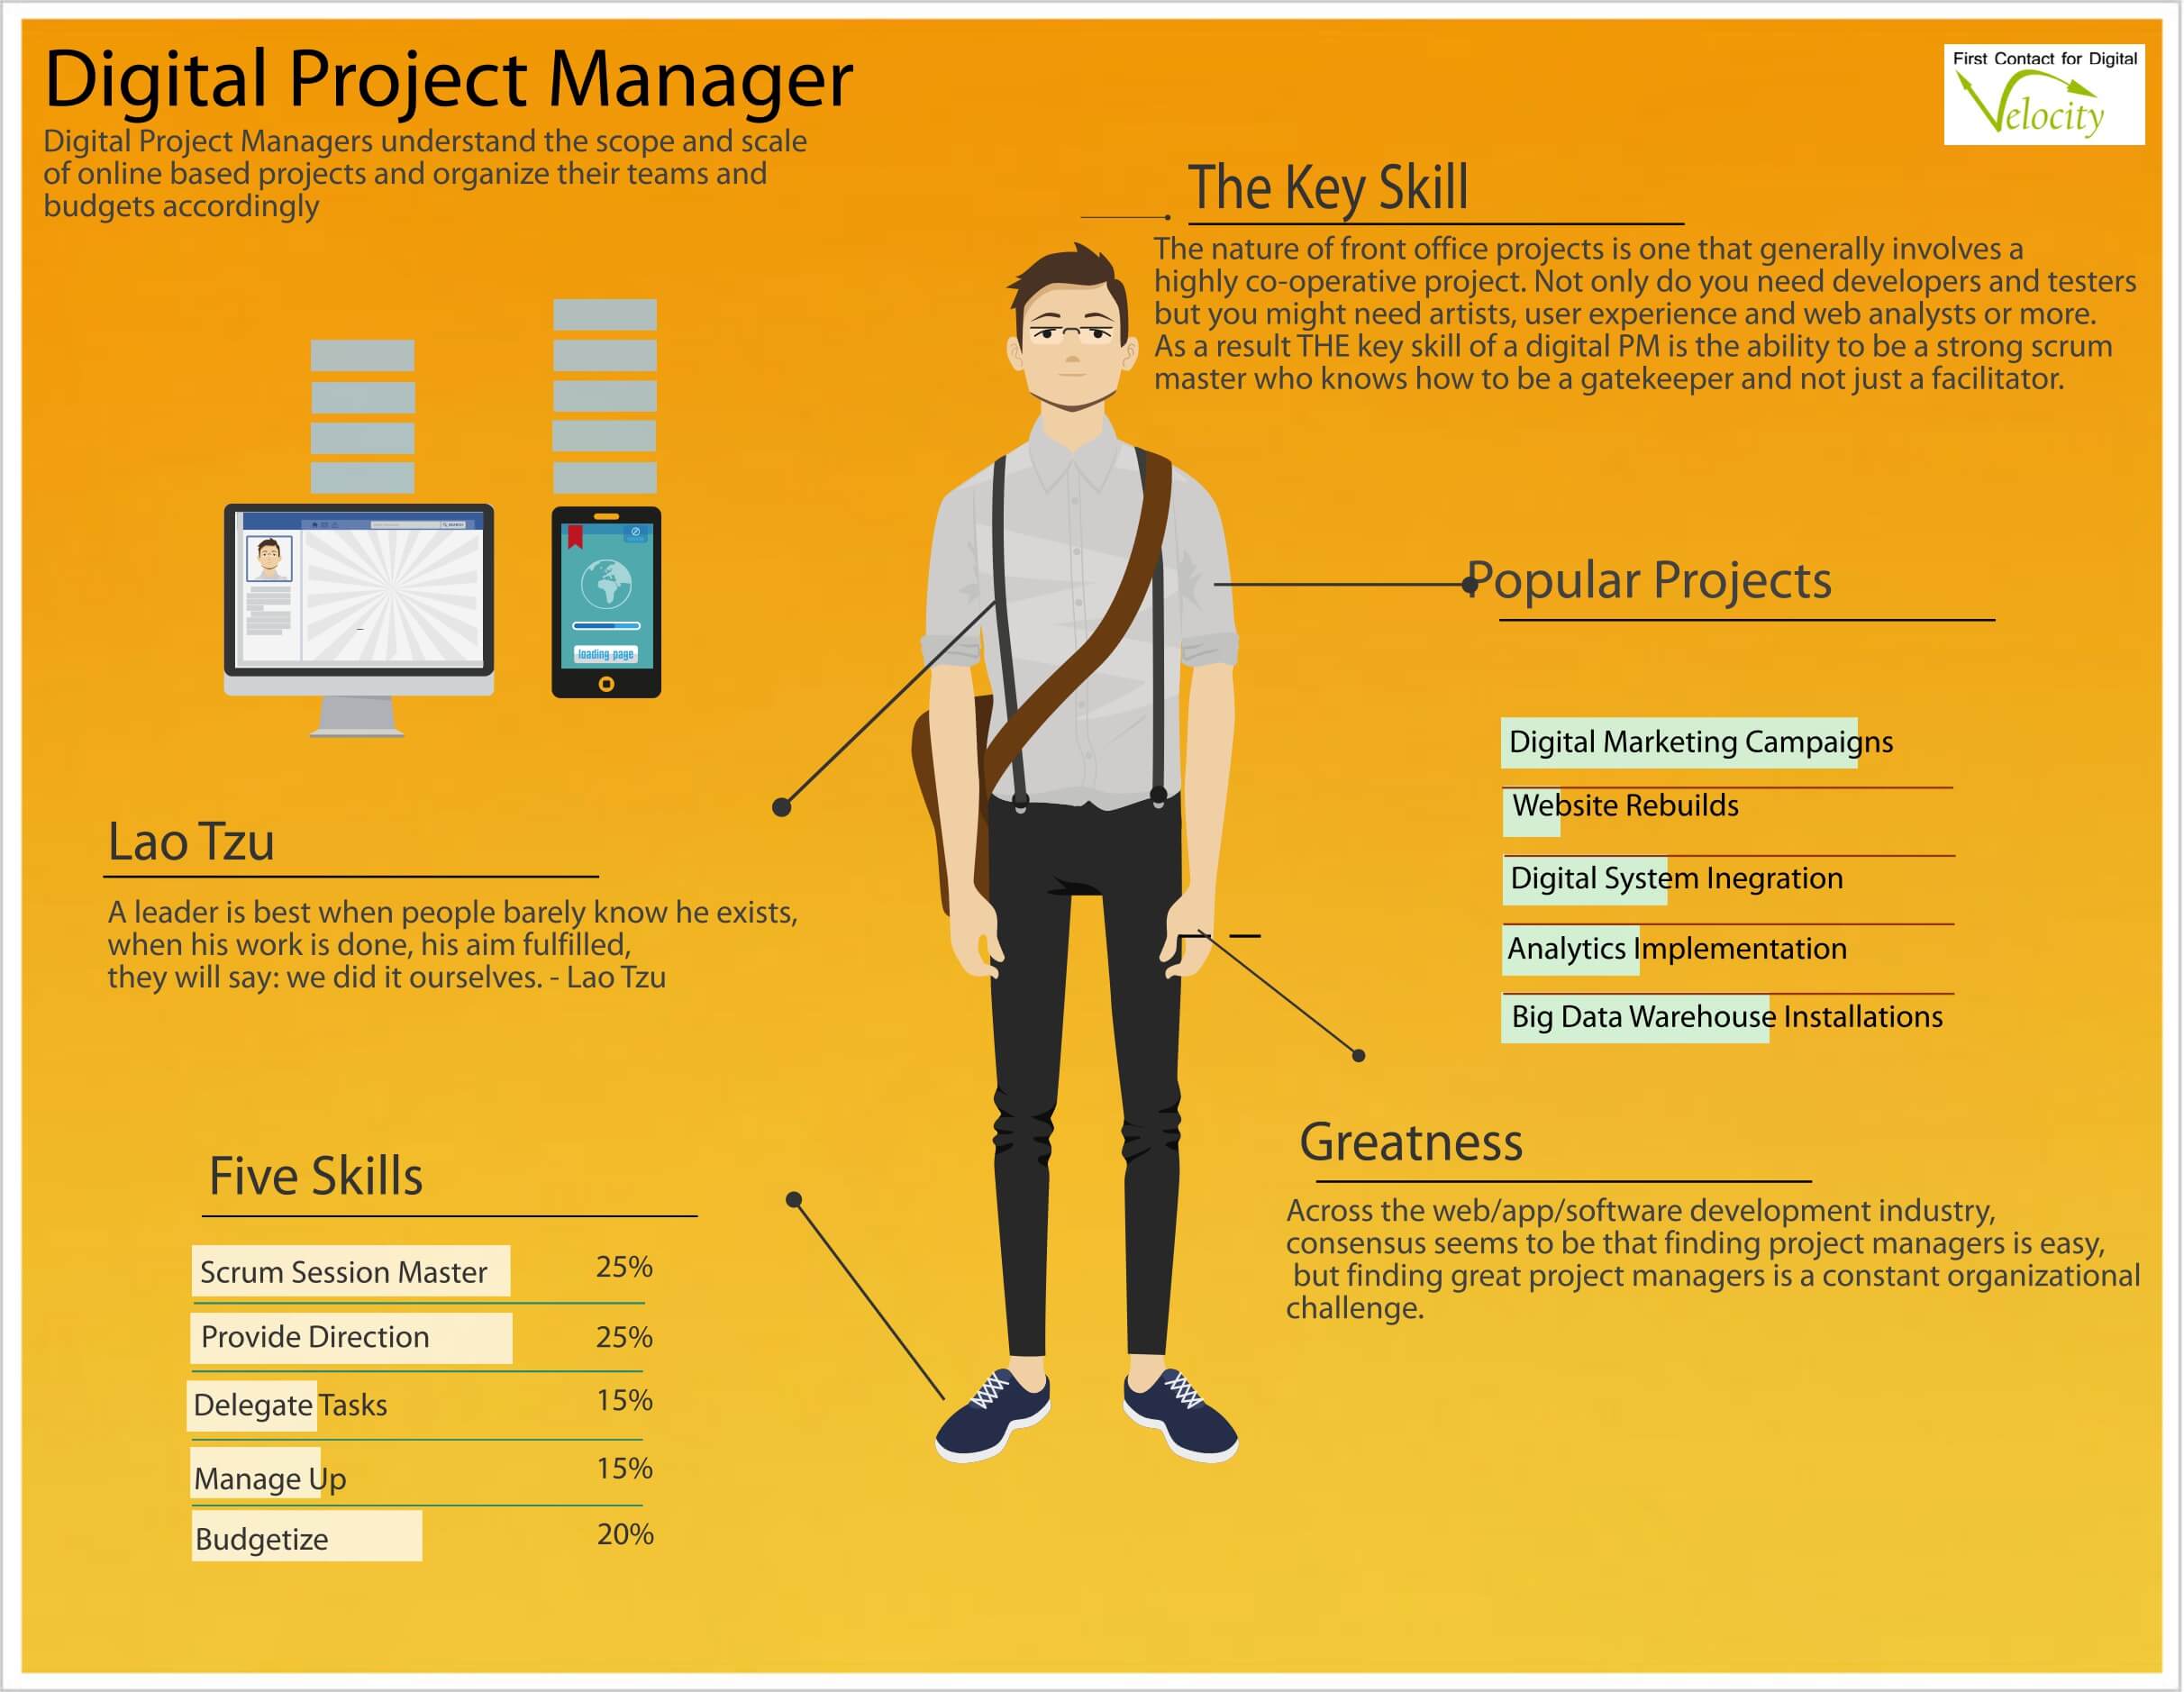 Who is a digital project manager?